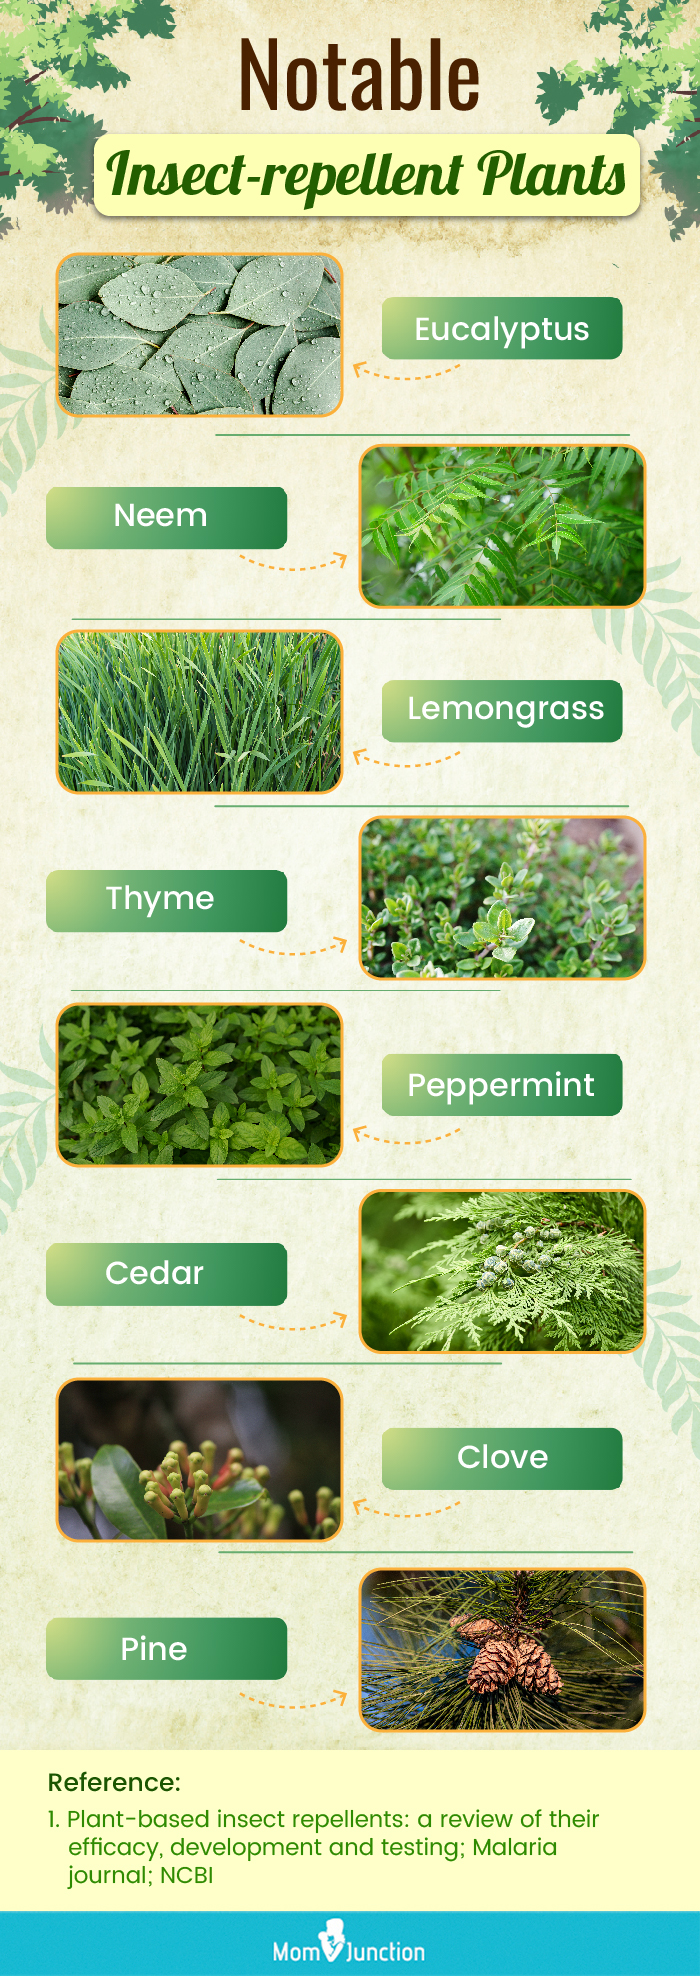 Notable Insect repellent Plants (infographic)